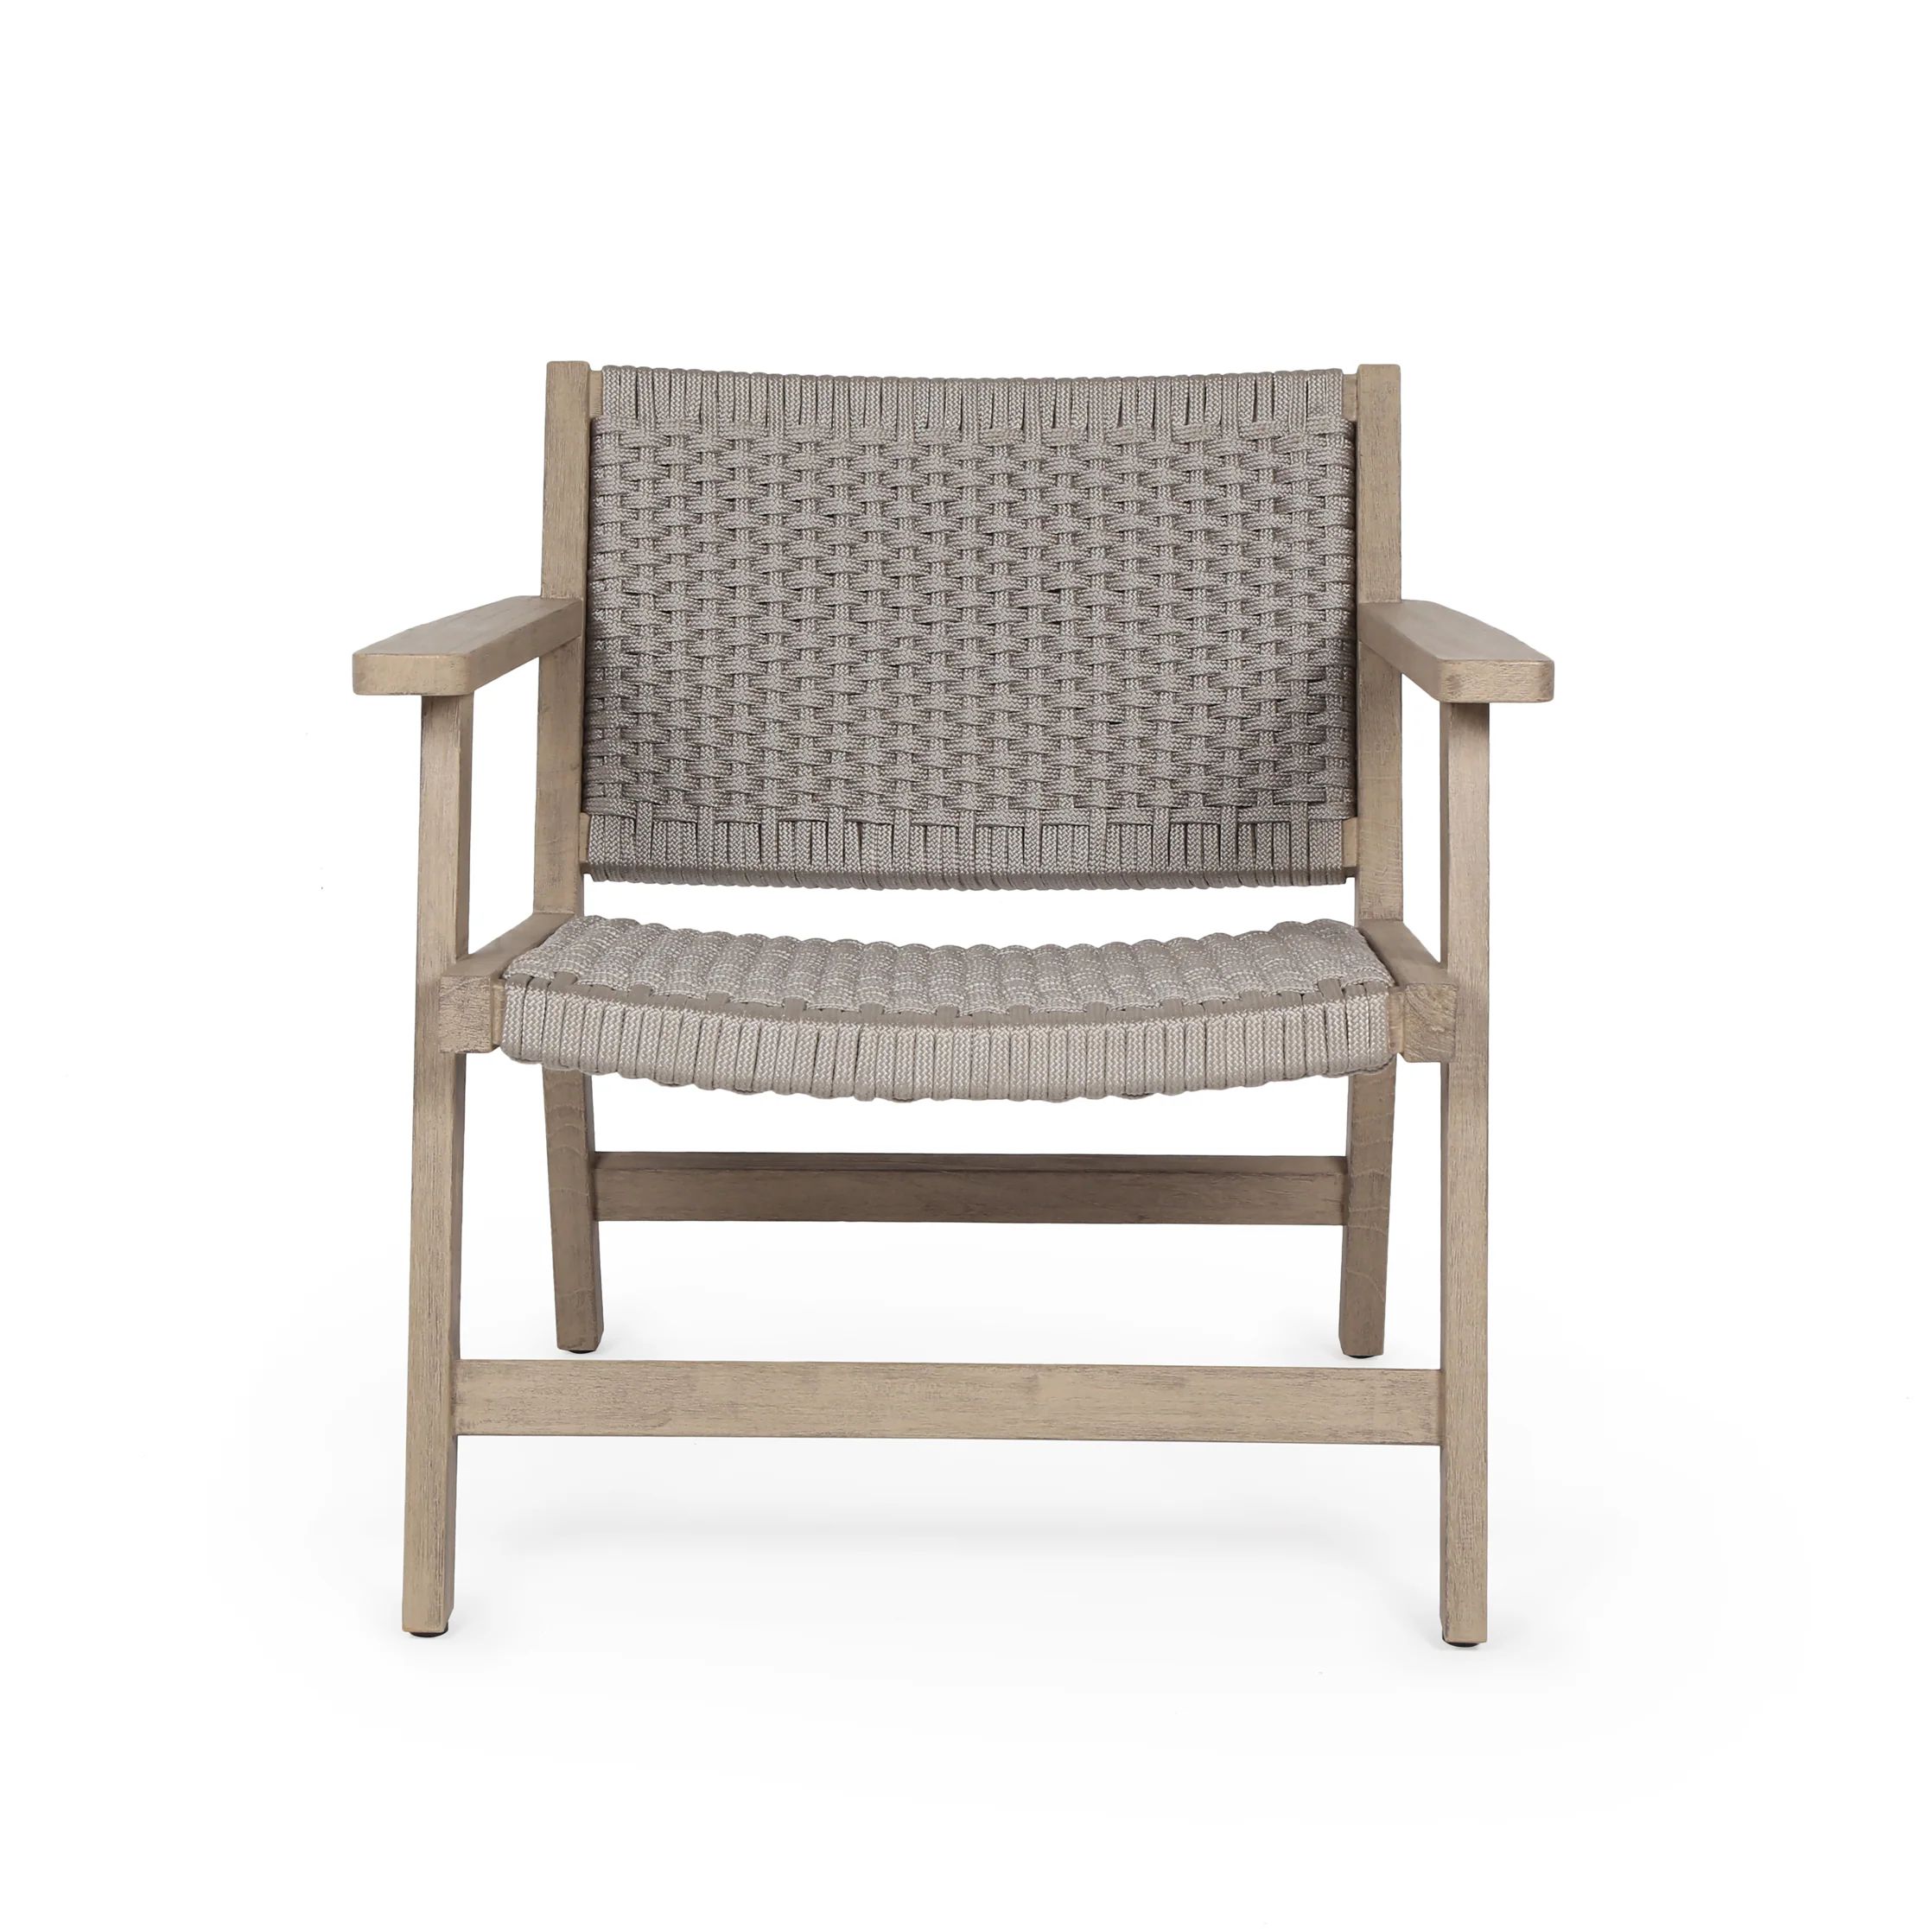 Delano Chair in Washed Brown | Burke Decor